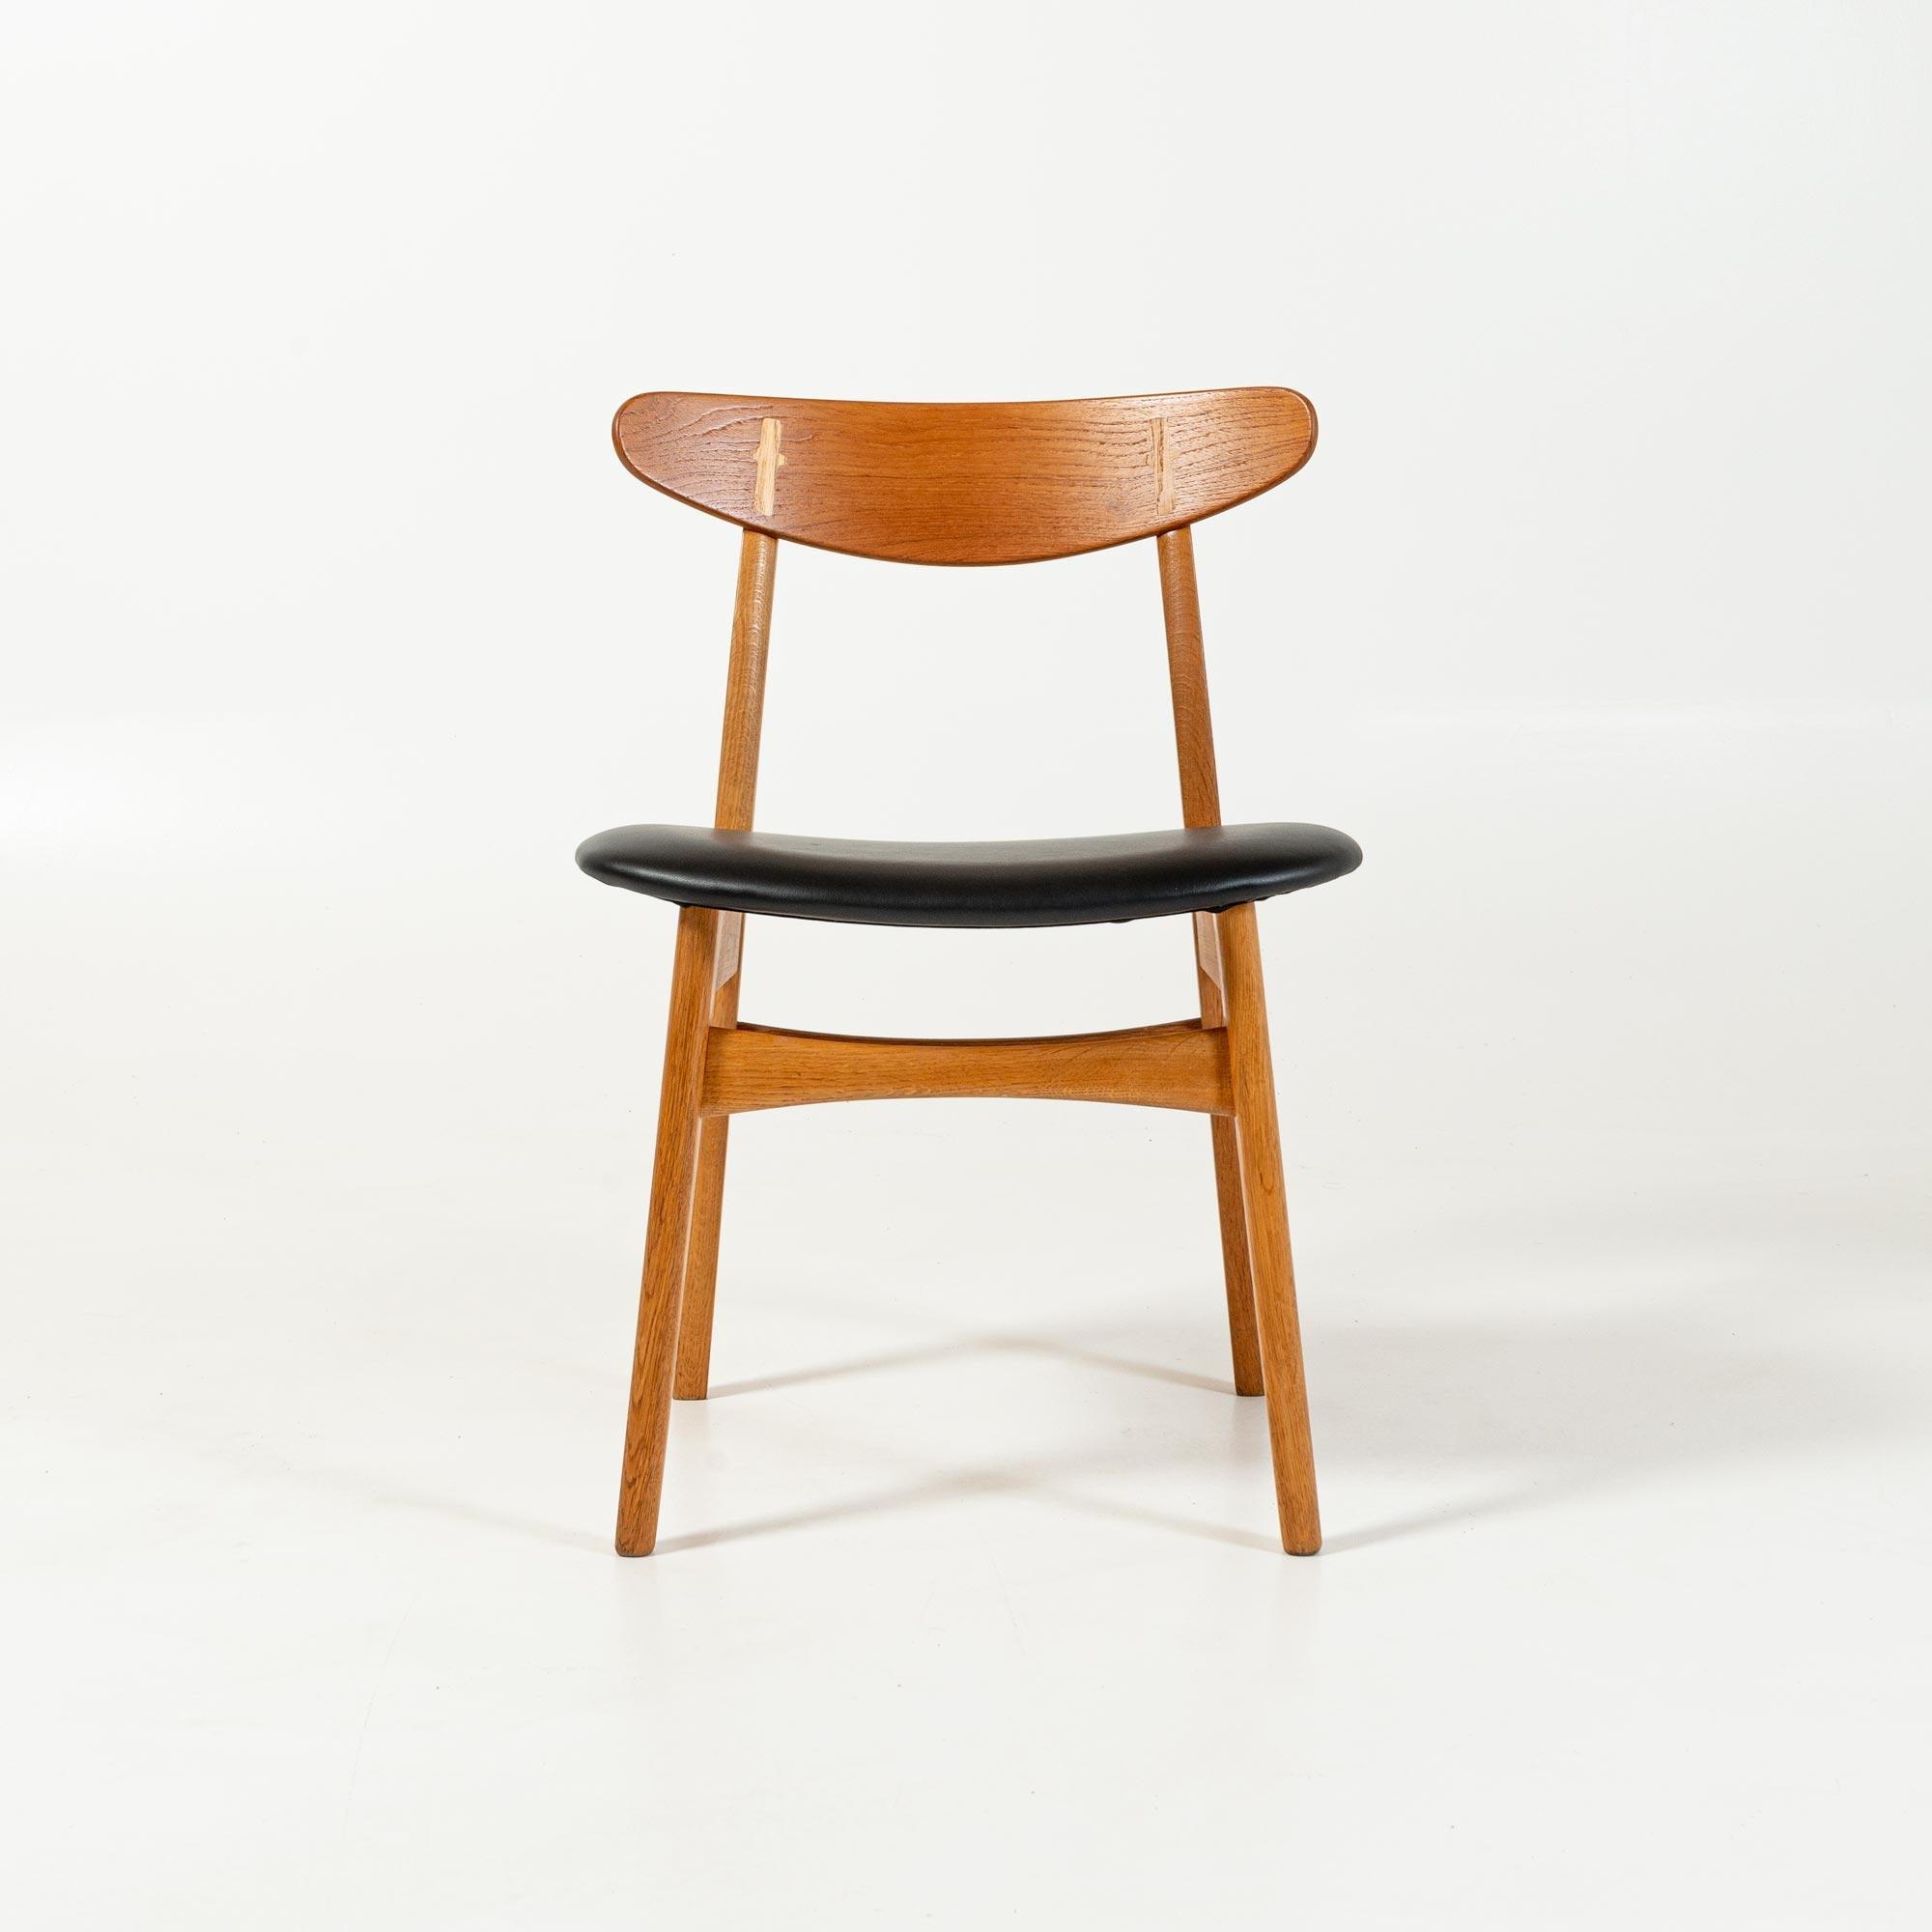 Mid-20th Century CH30 Dining Chairs by Hans Wegner for Carl Hansen & Son in Oak, Teak and Leather